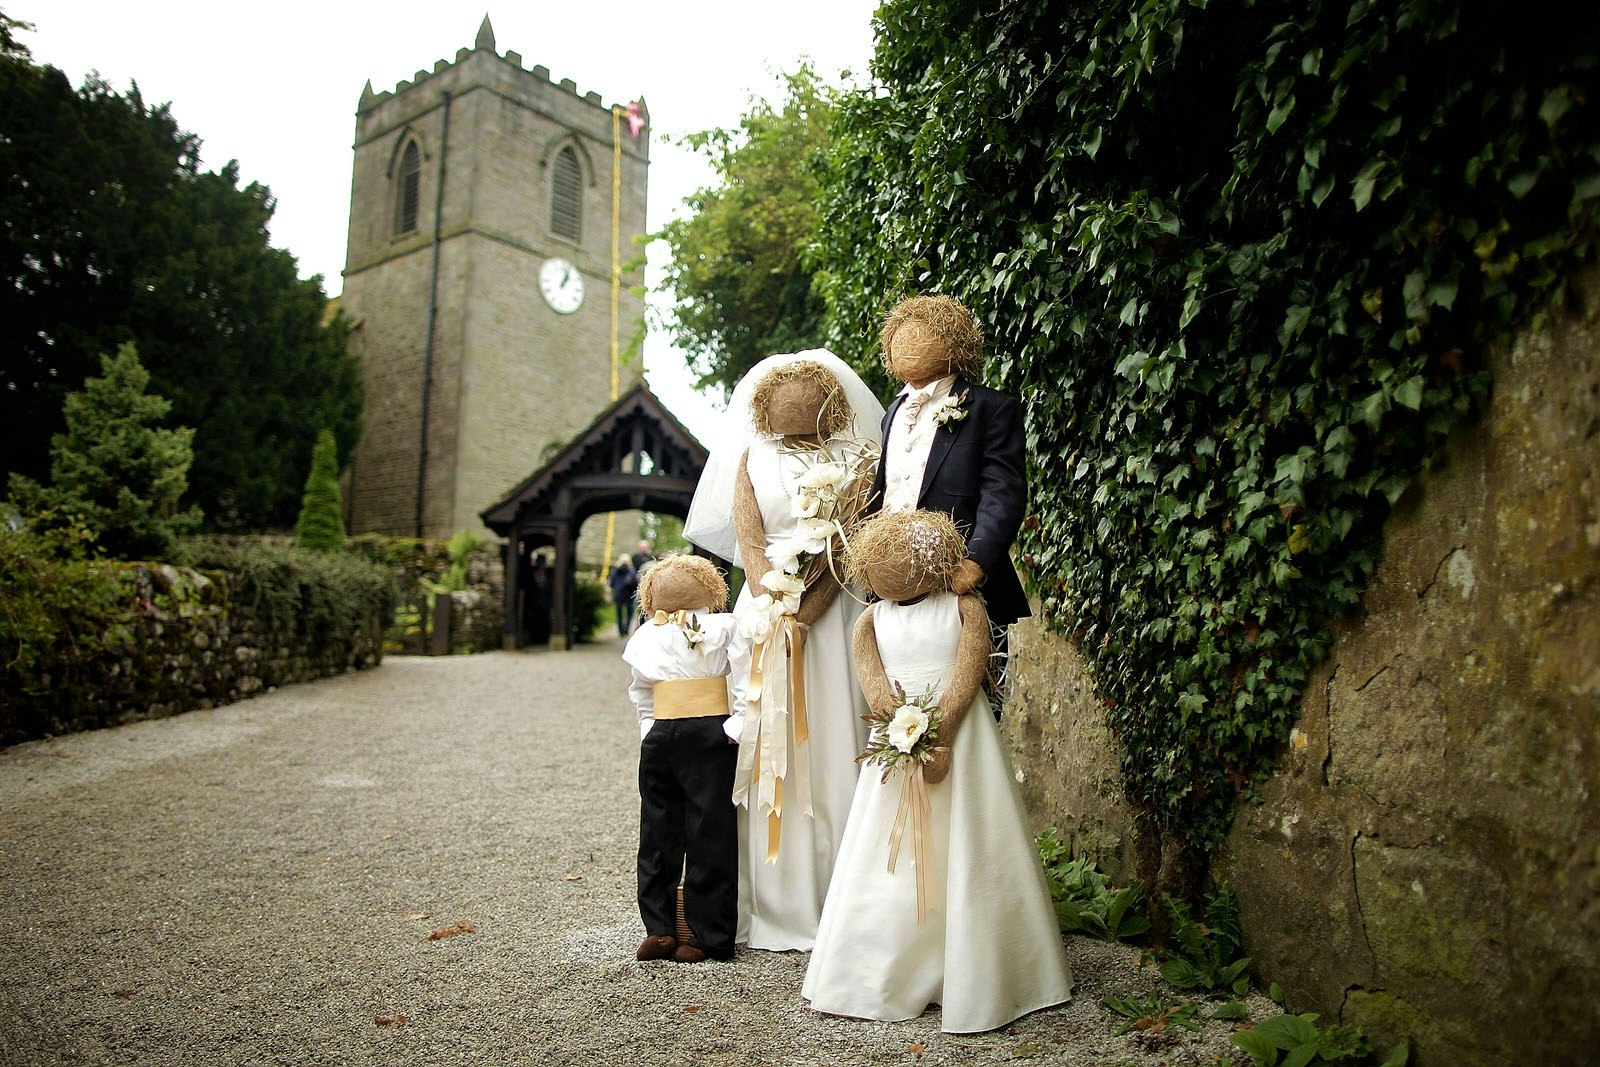 Scaregrow family dressed in wedding outfits next to a church